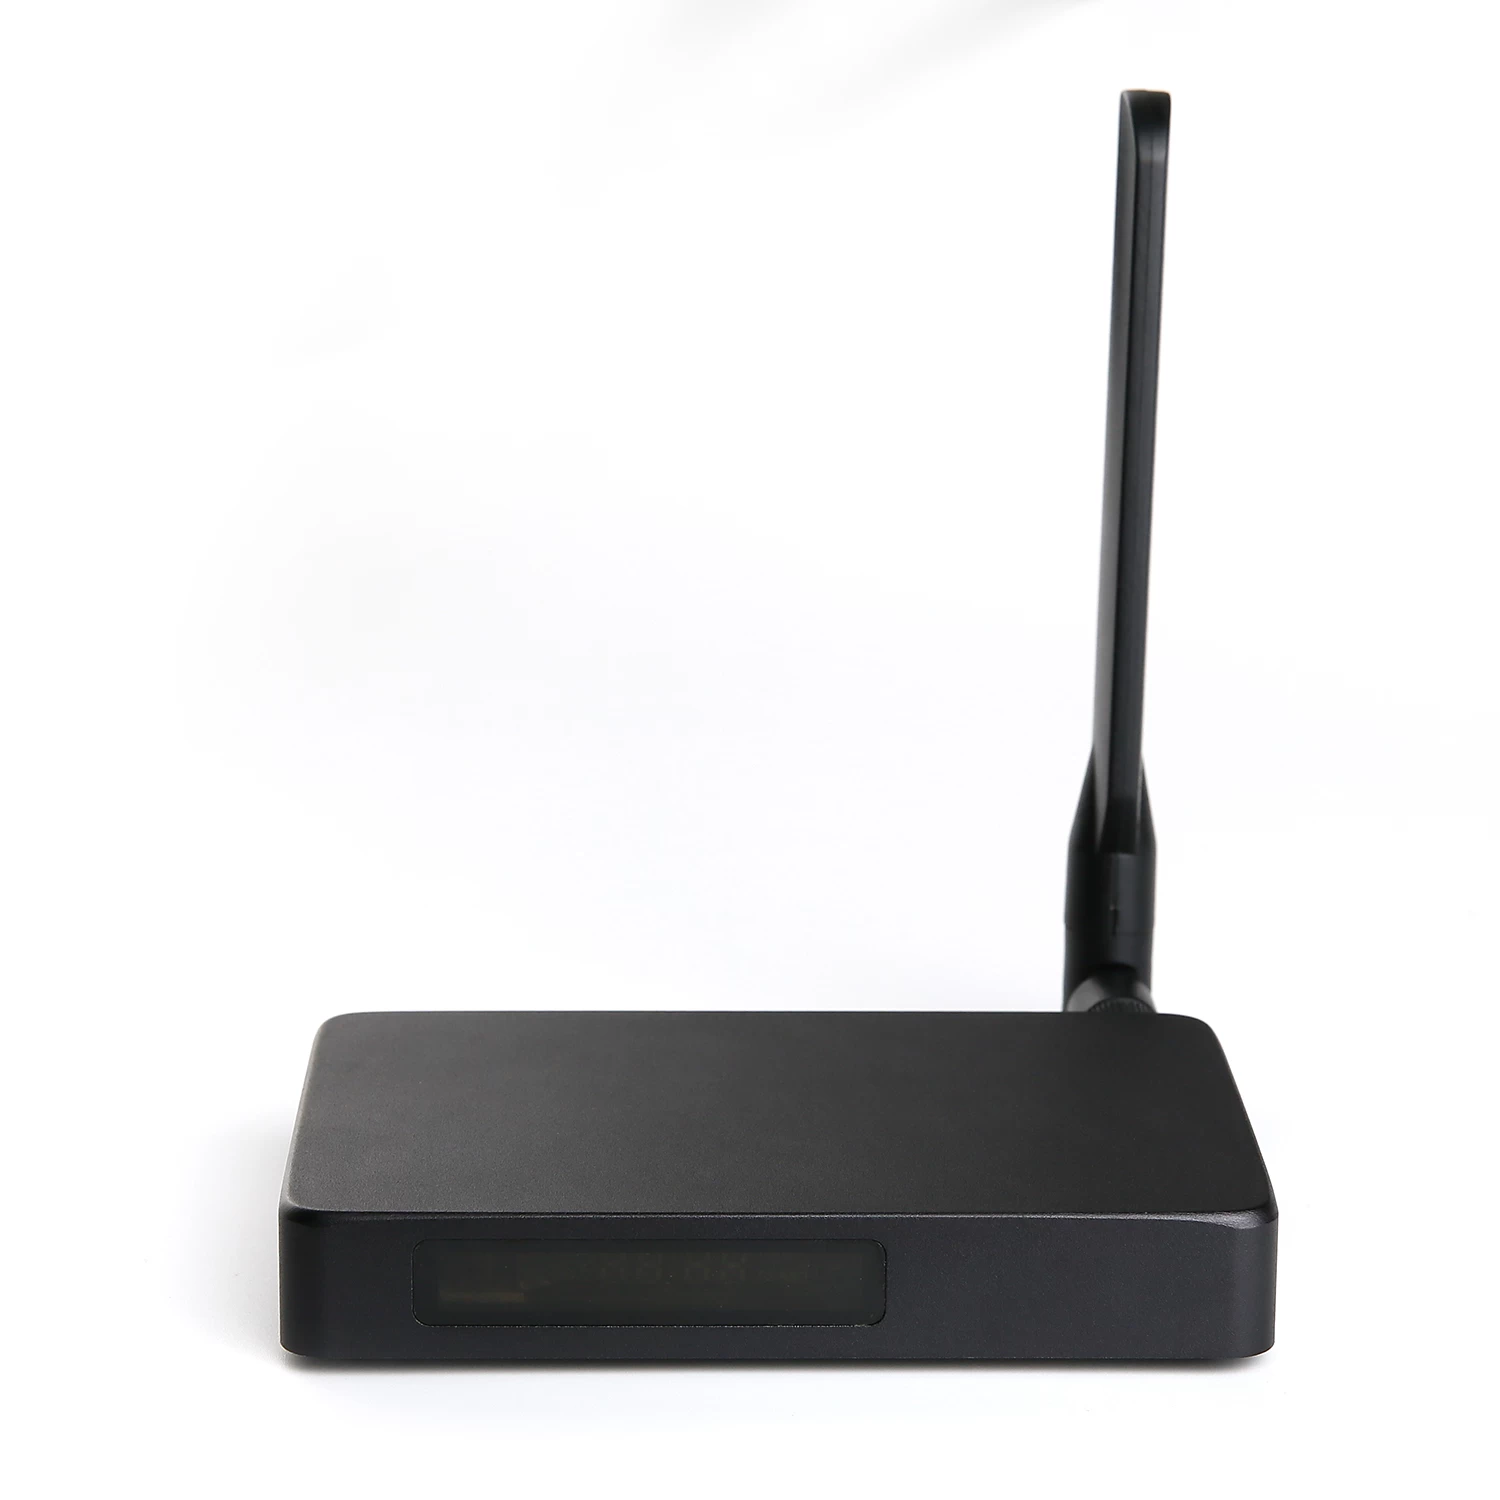 Best Android TV Box HDMI input, 4K Android tv box manufacturer china